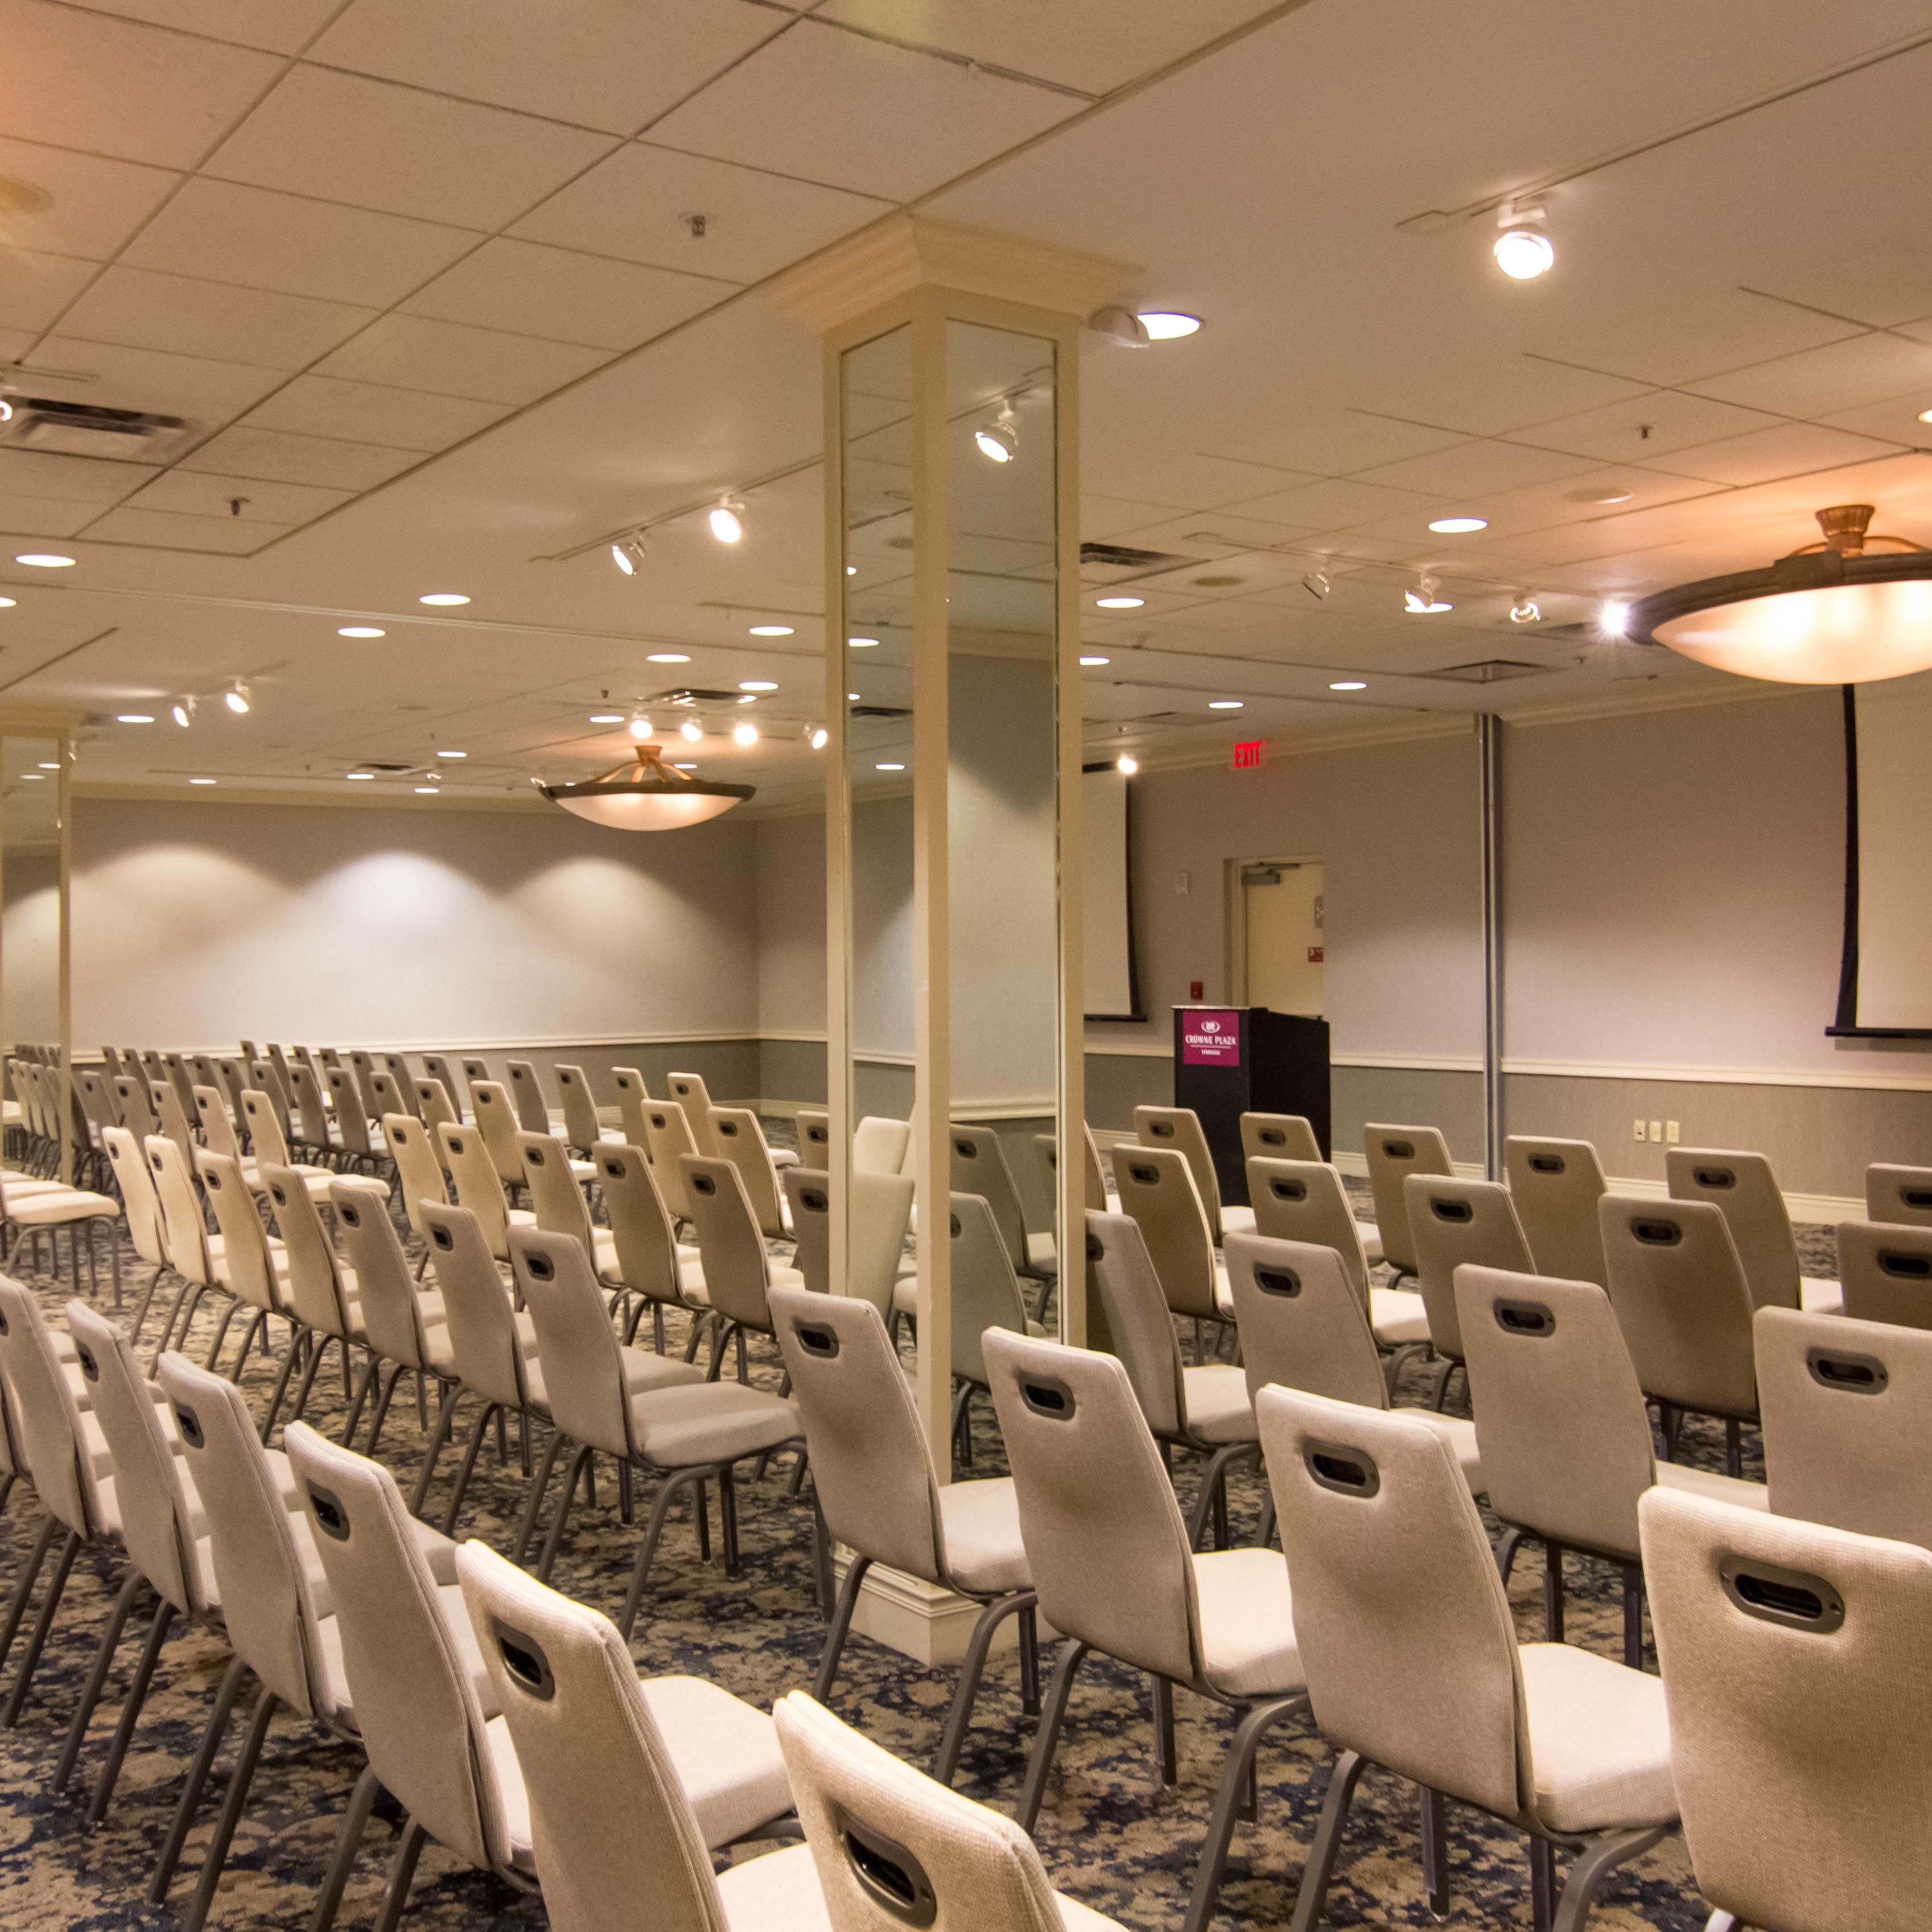 Come in and see our newly renovated meeting space.